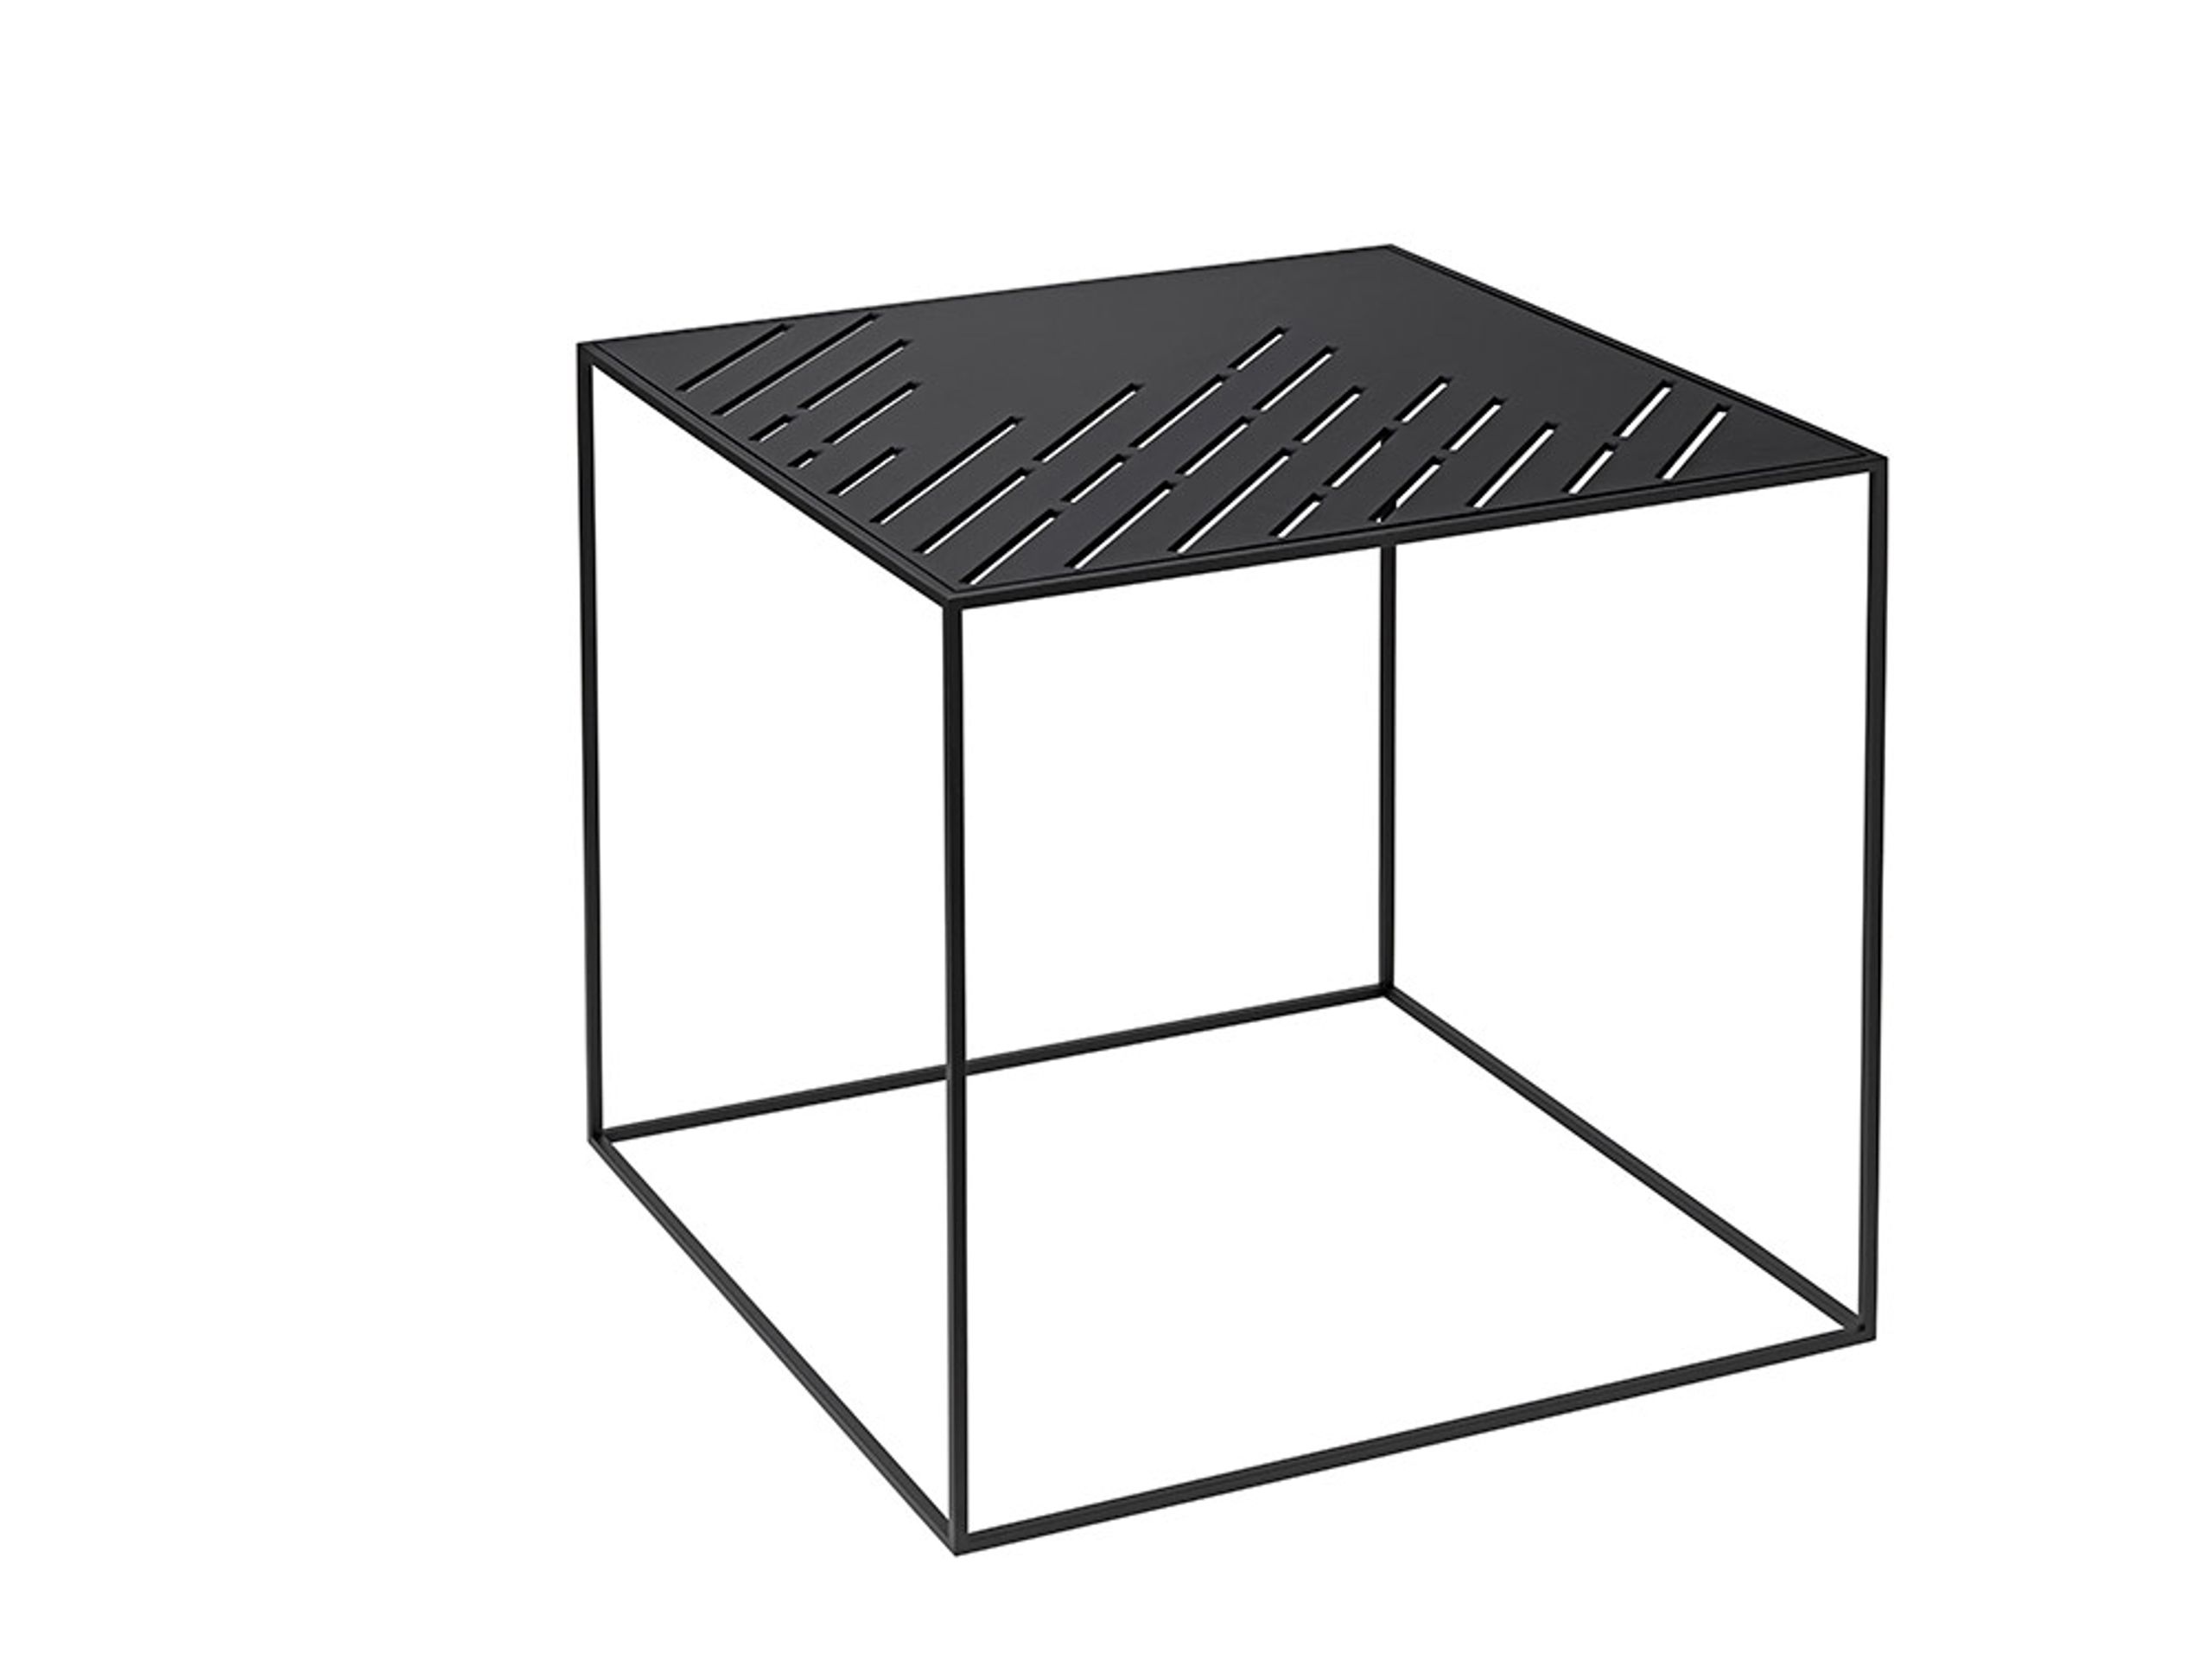 By Lassen - Conseil d'administration - Twin Tabletops - Perforated Black - Twin 42